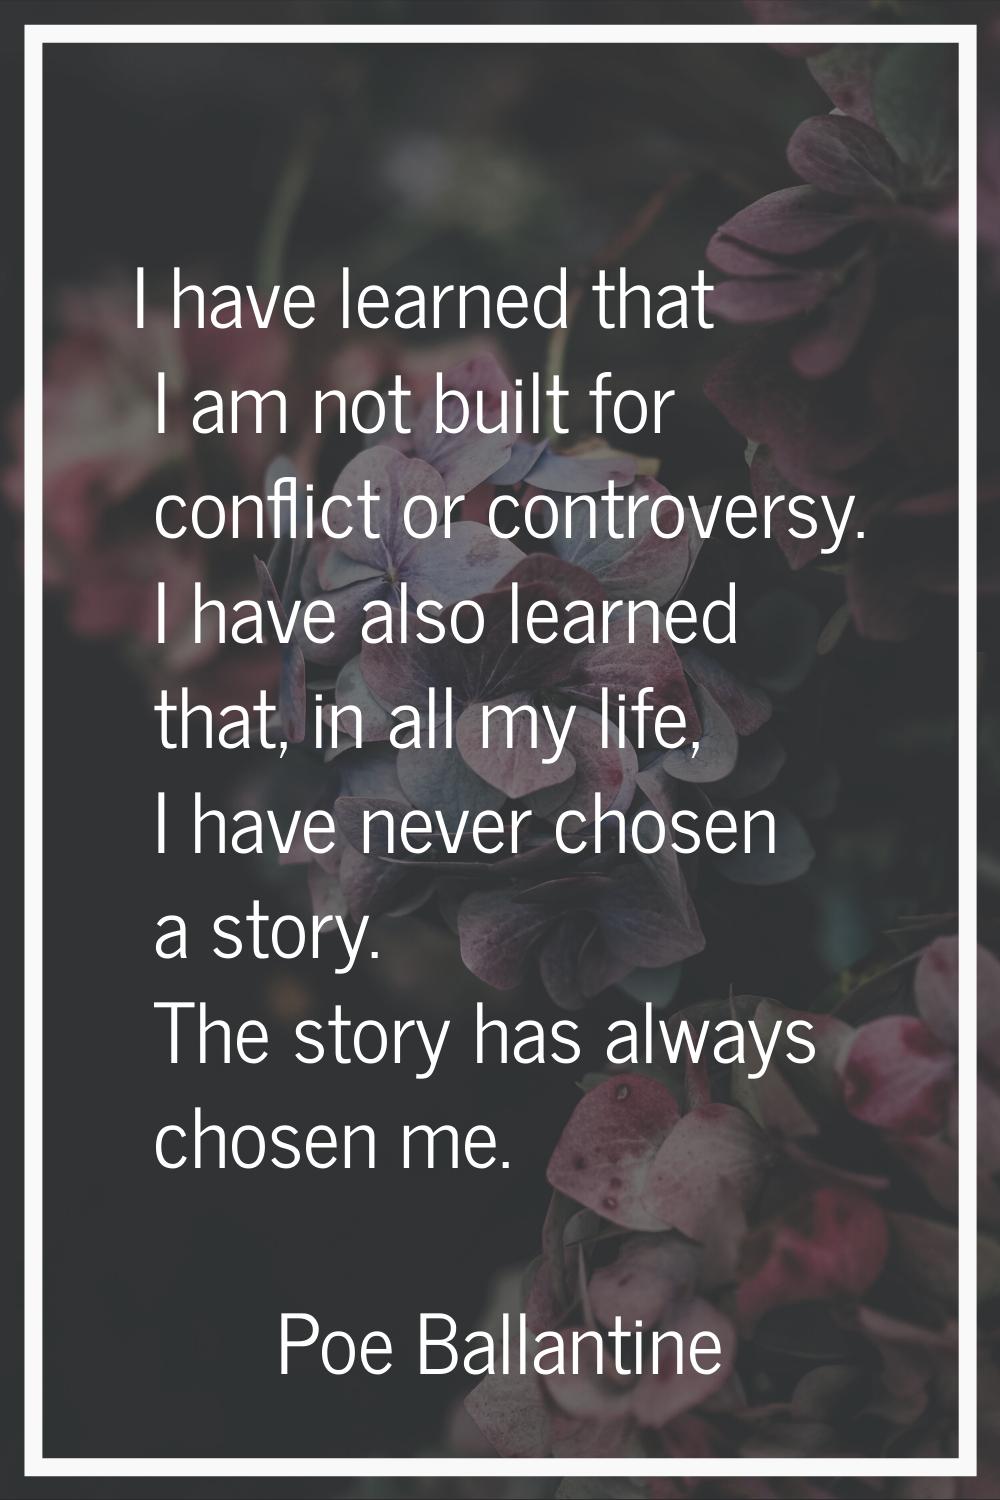 I have learned that I am not built for conflict or controversy. I have also learned that, in all my